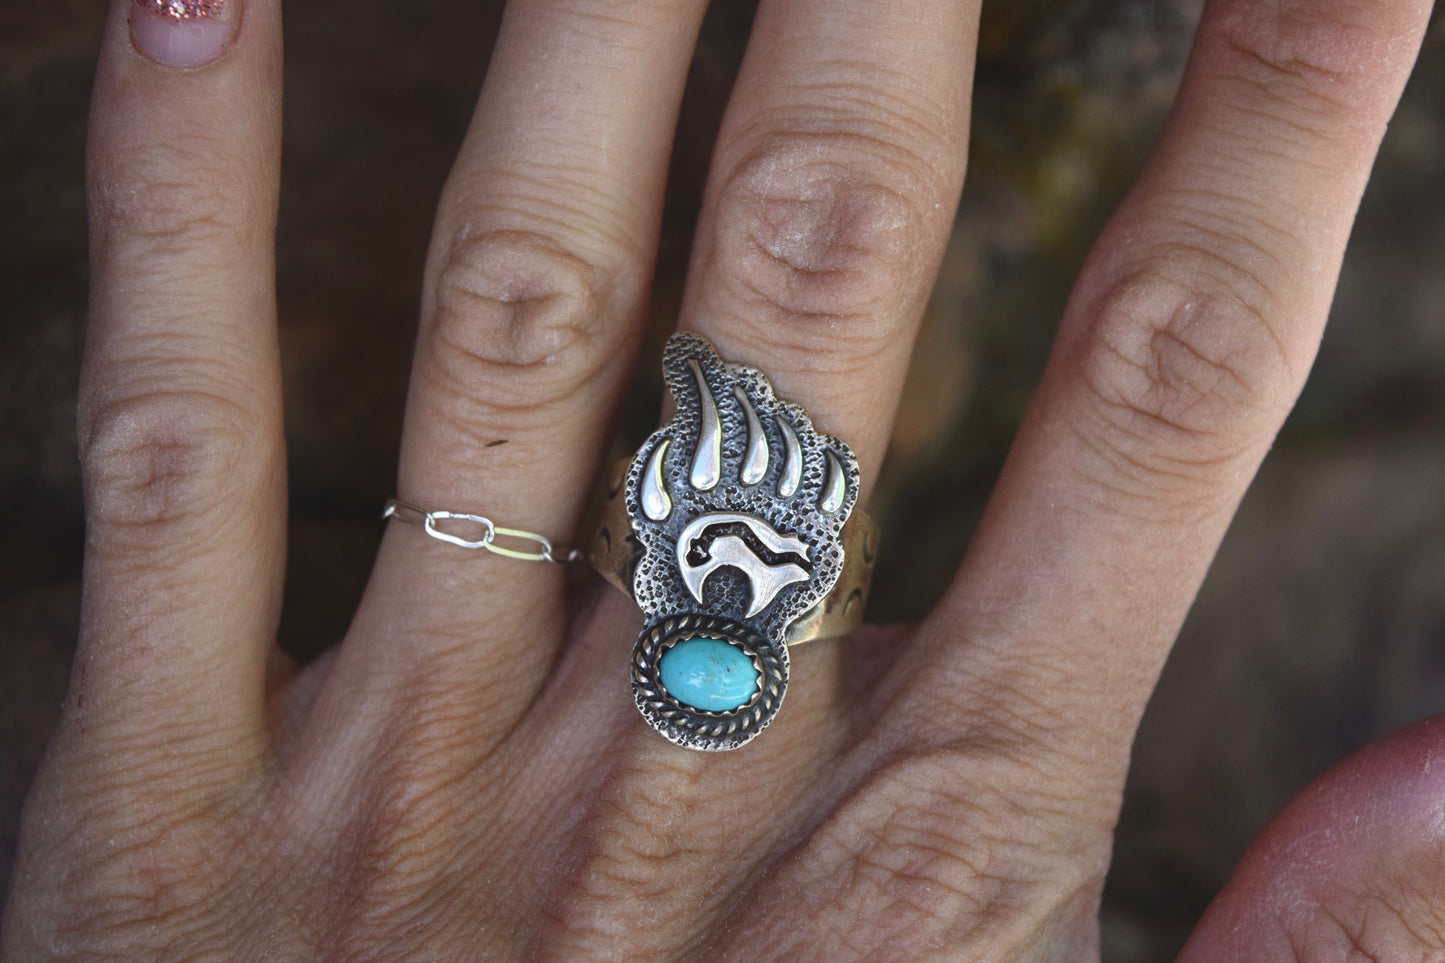 BEAR CLAW RING FROM THE RODGERS COLLECTION